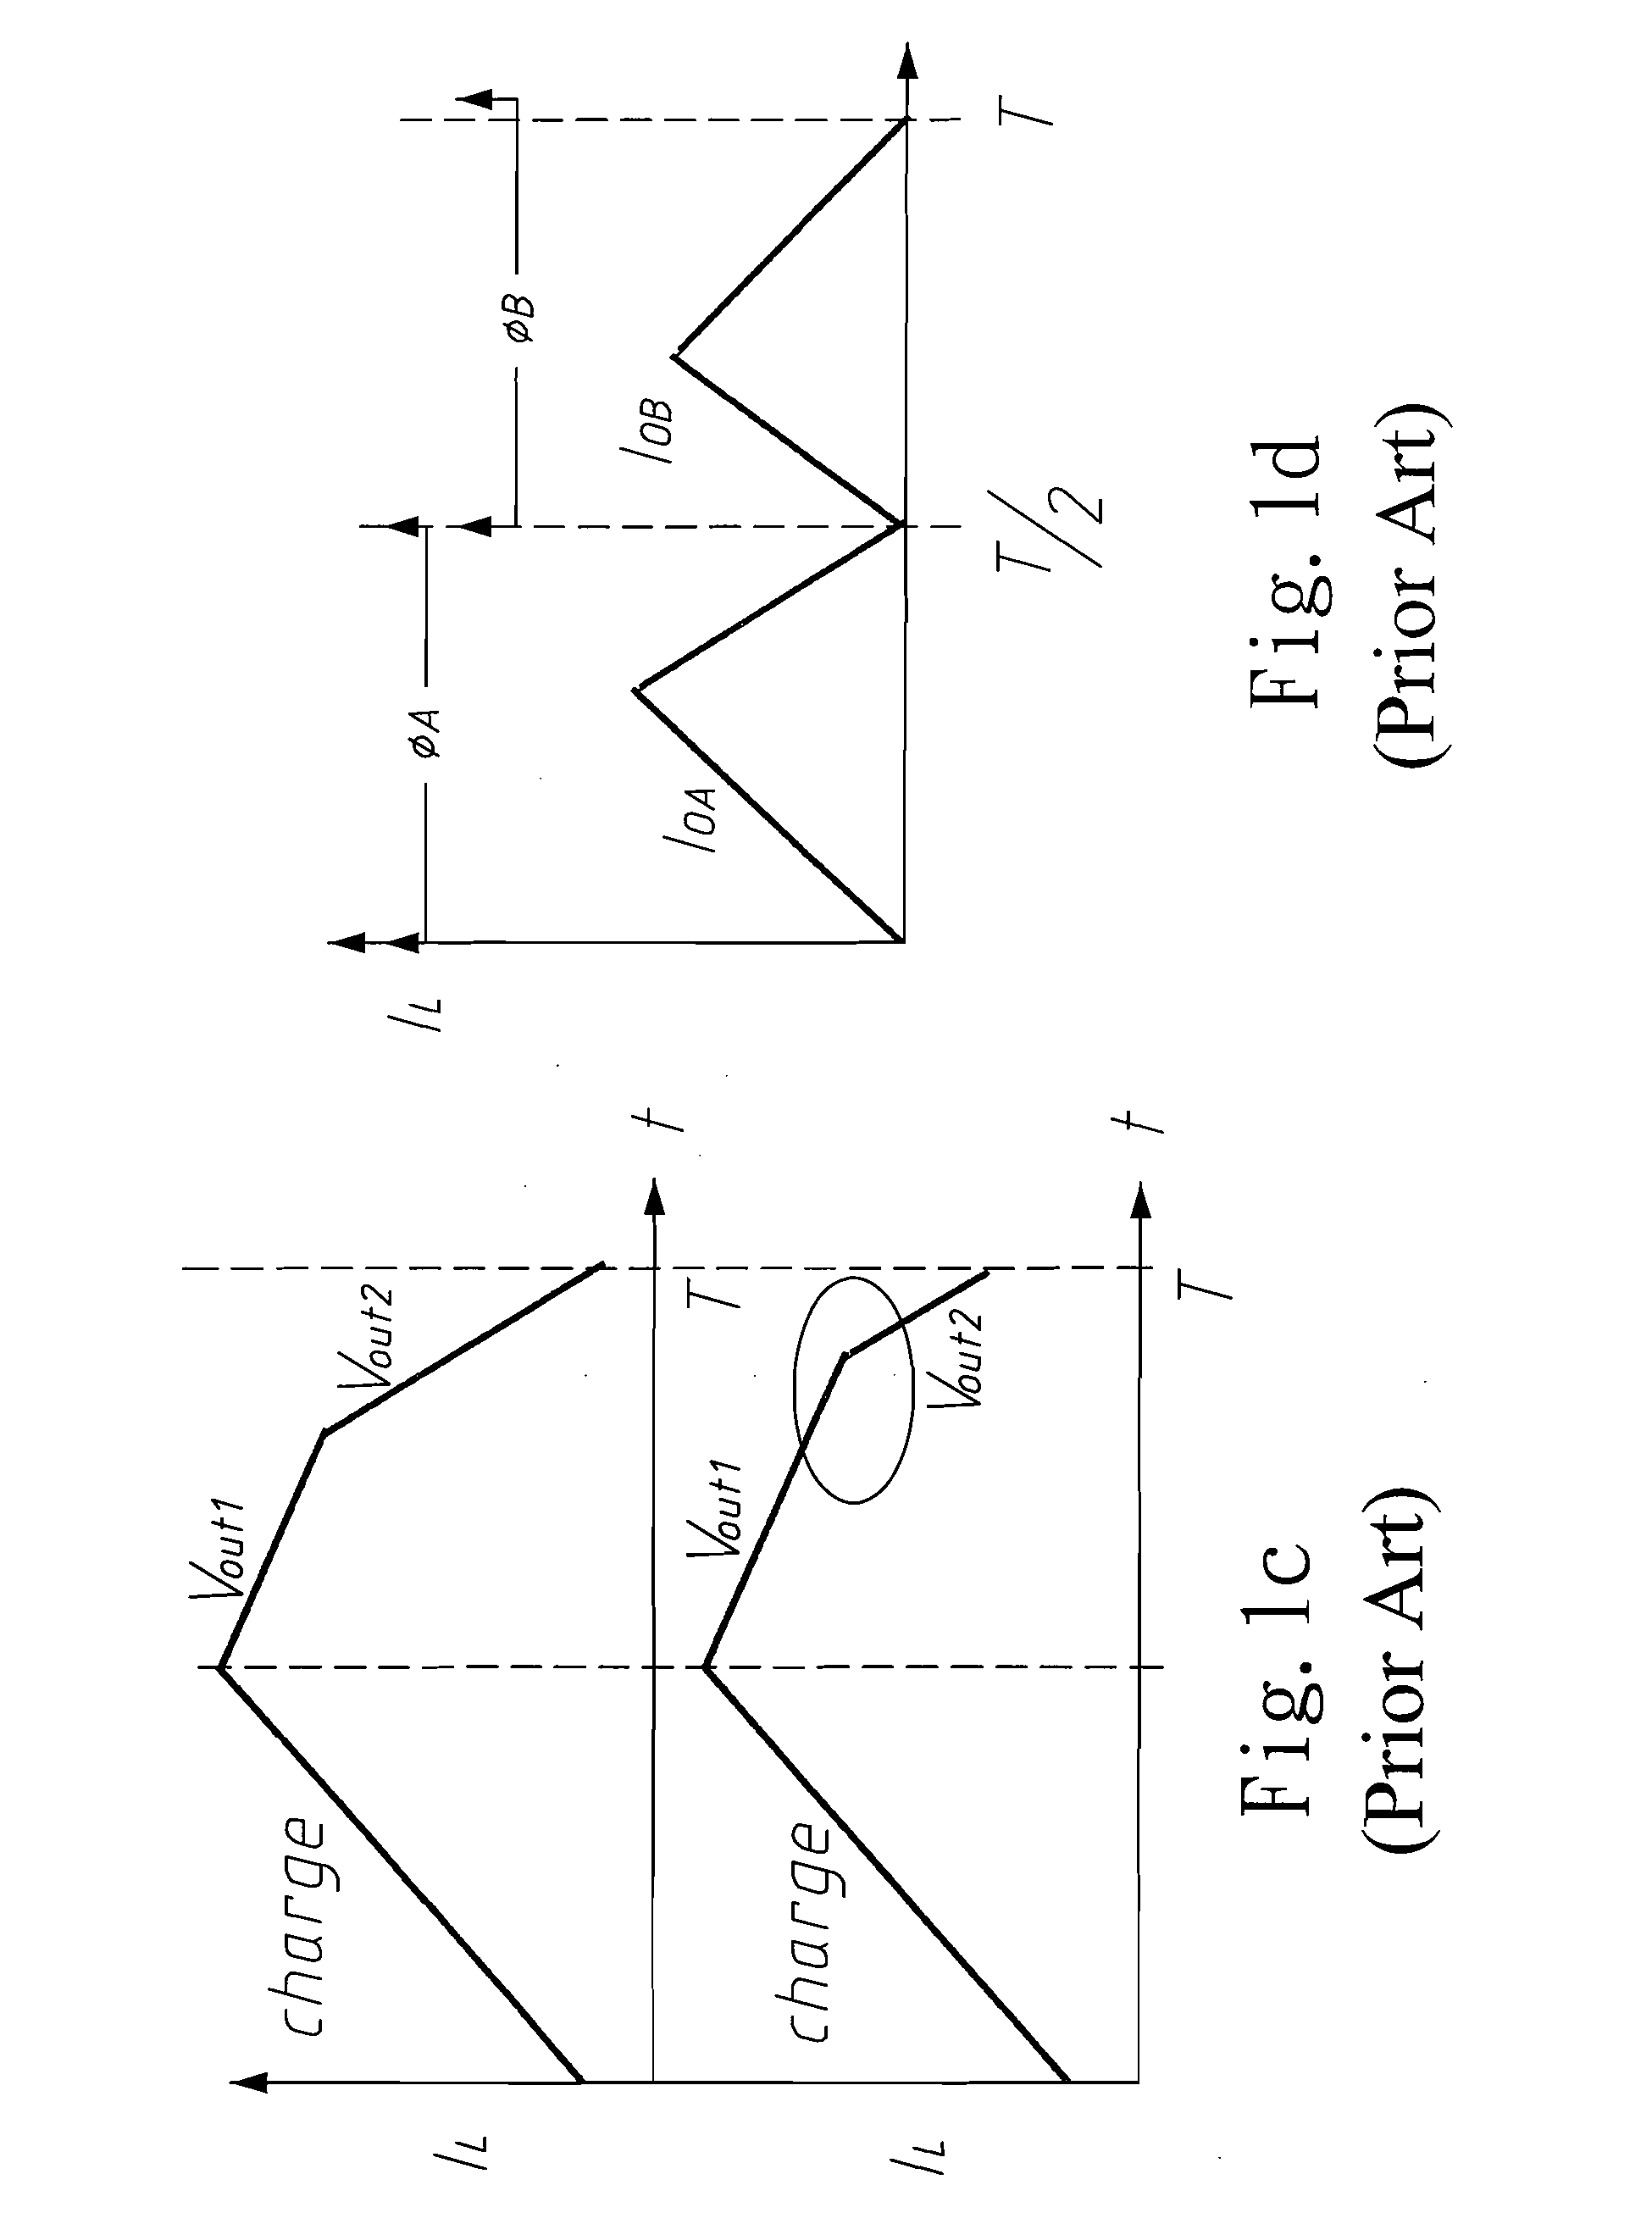 Single inductor multi-output (SIMO) conversion device for enlarging load range